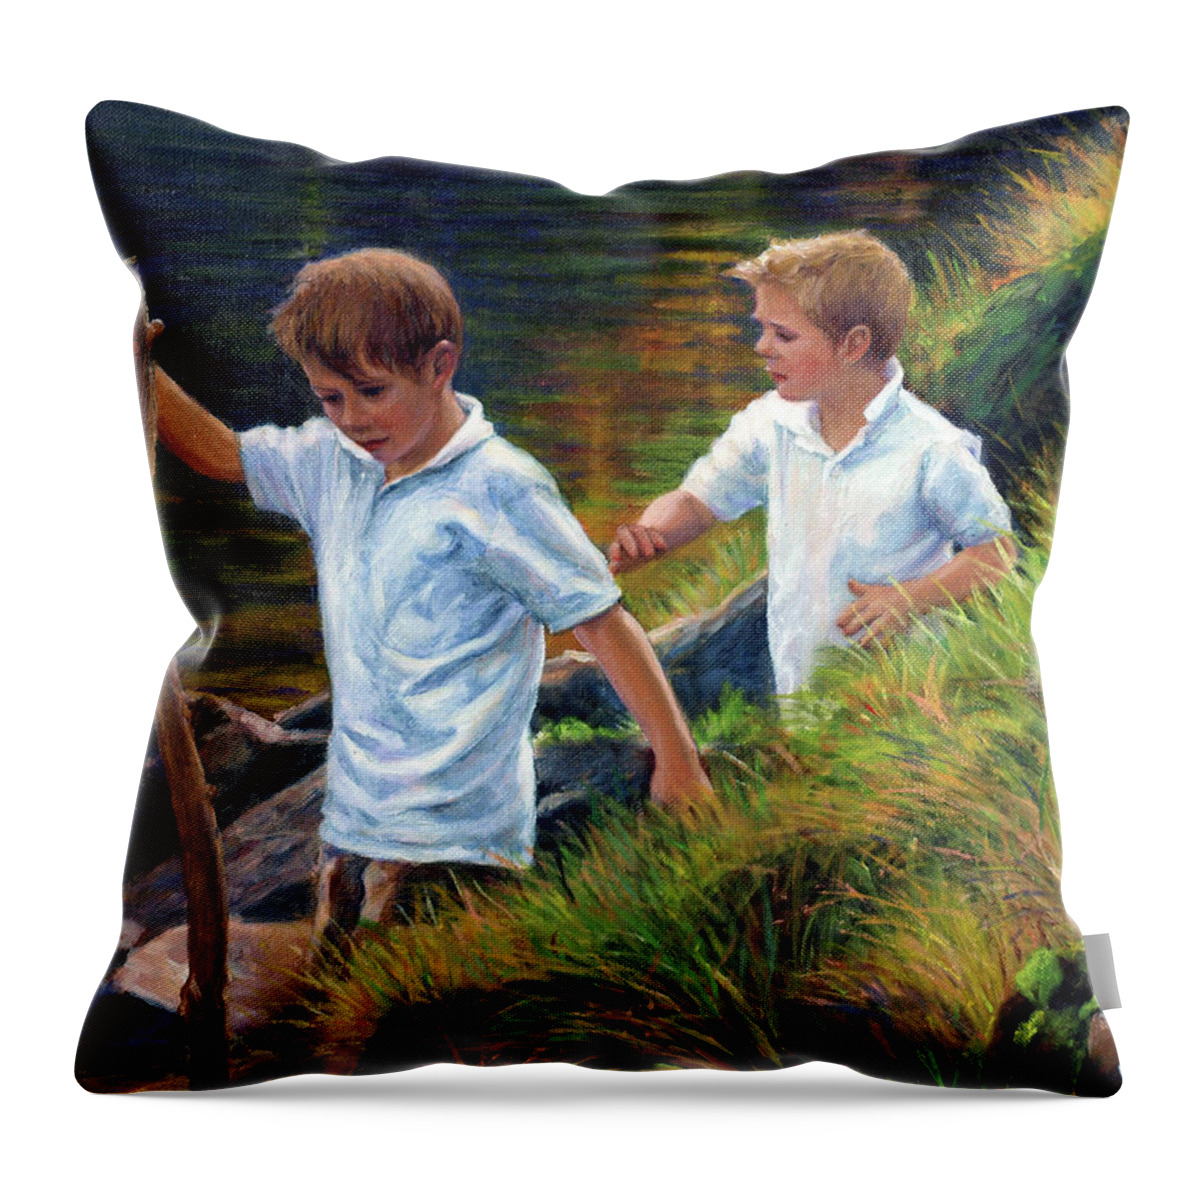 Farm Throw Pillow featuring the painting Two Boys Hiking by Marie Witte